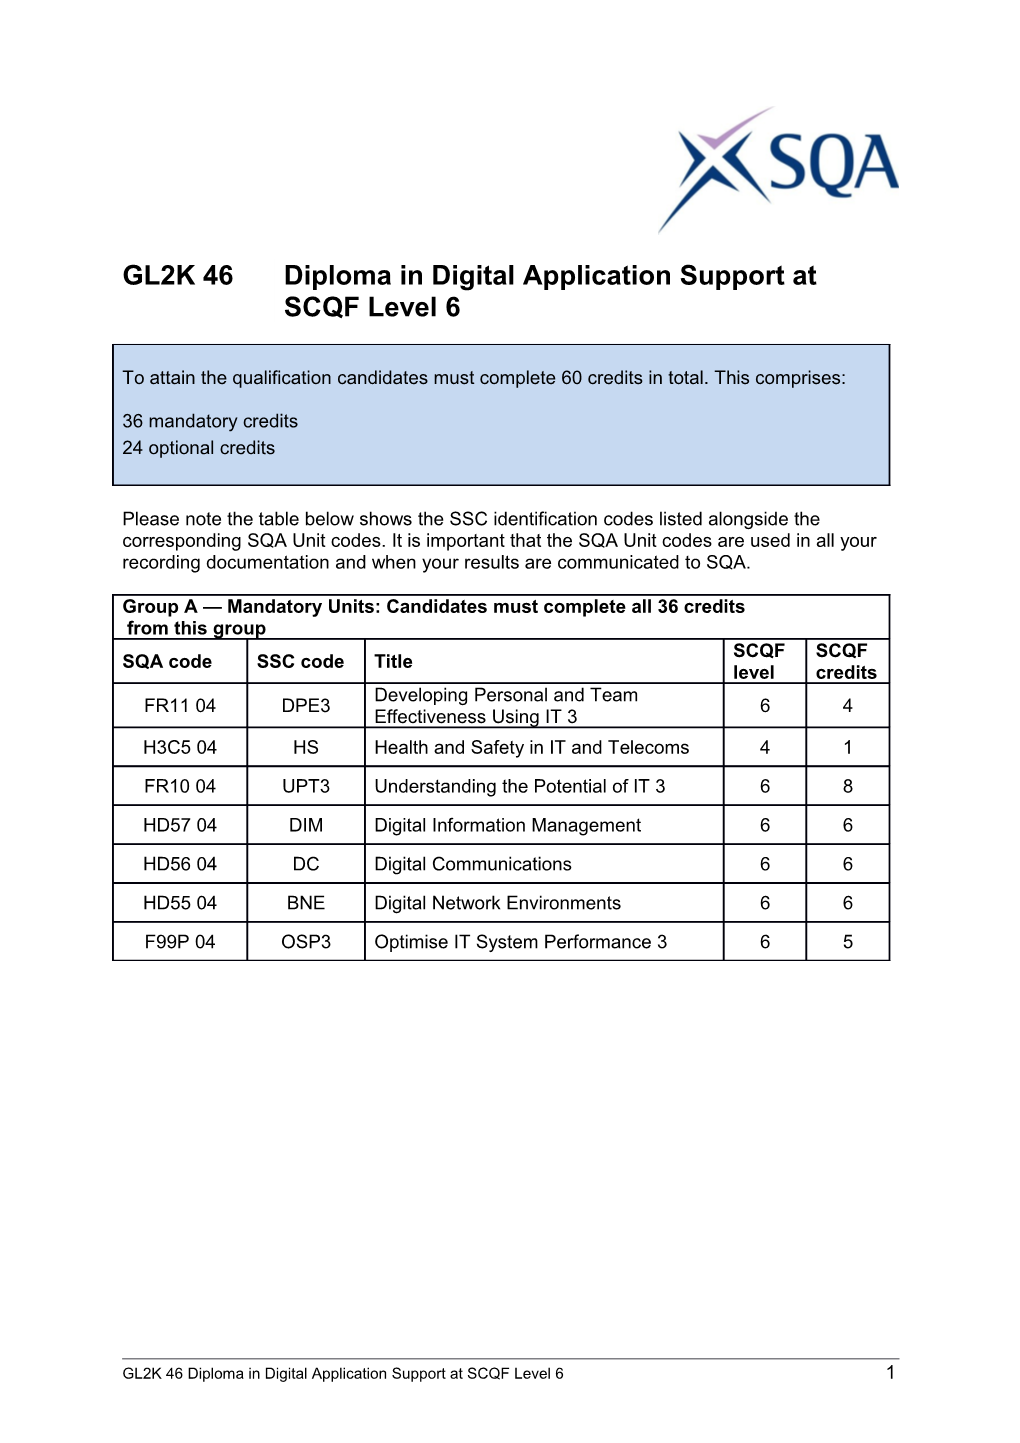 GL2K 46 Diploma in Digital Application Support at SCQF Level 6 3